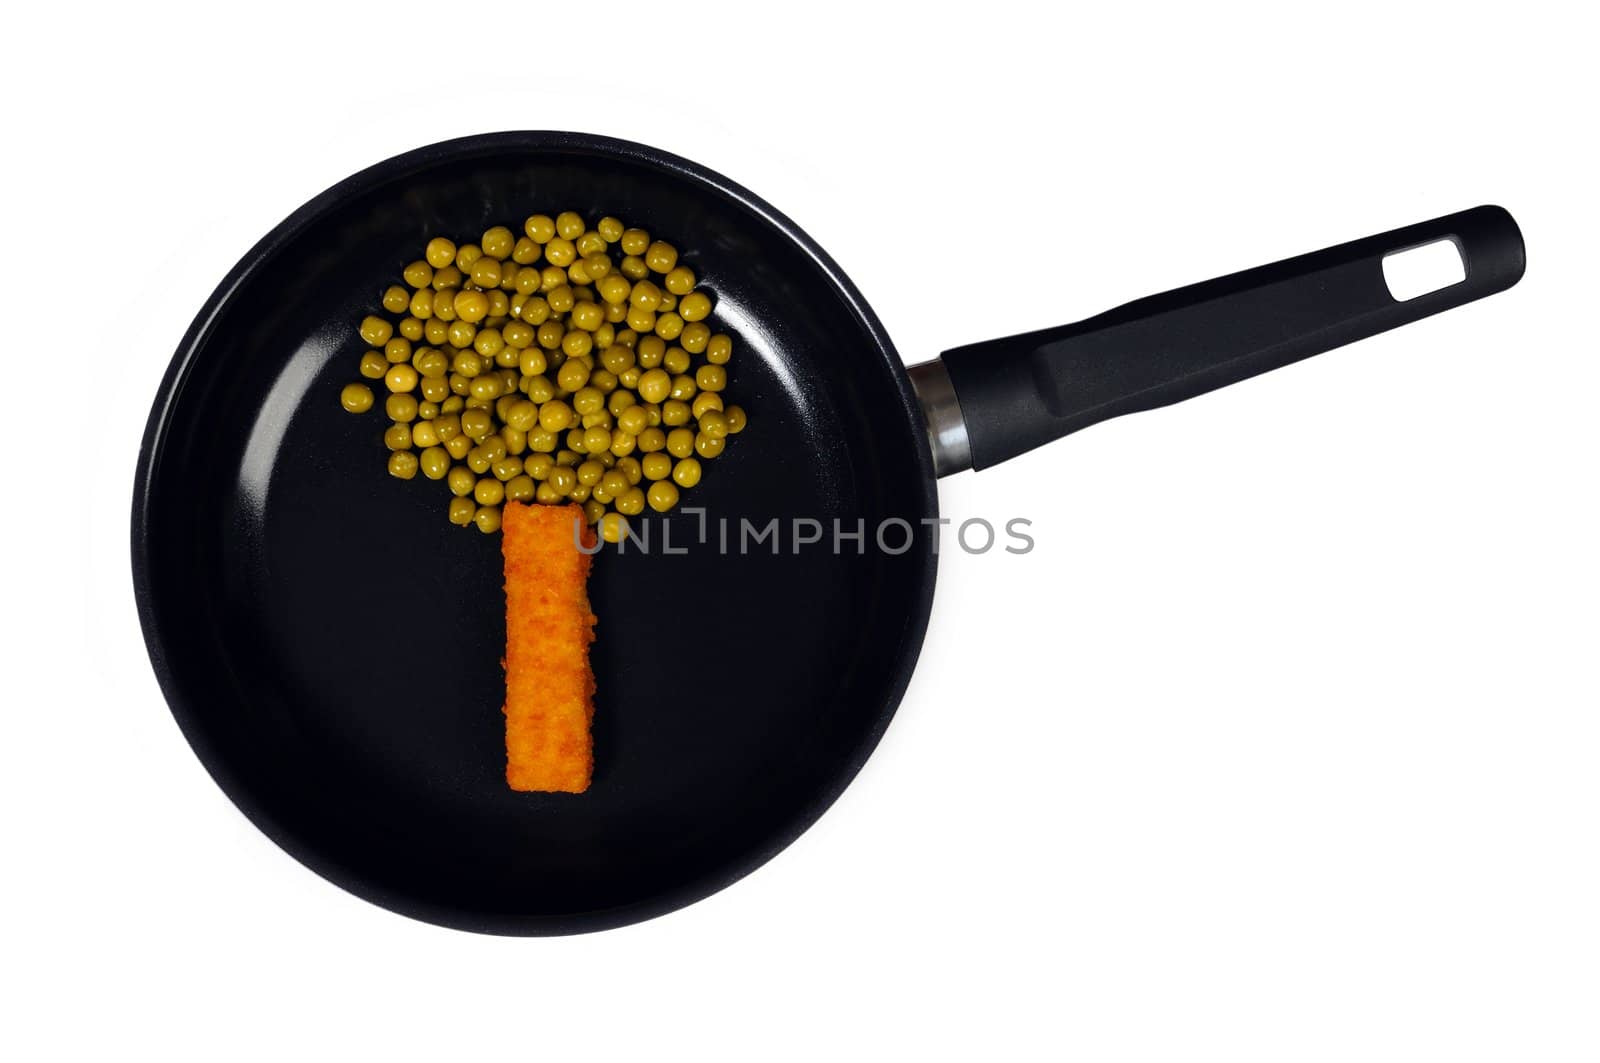 Funny healthy vegetables on a frying pan